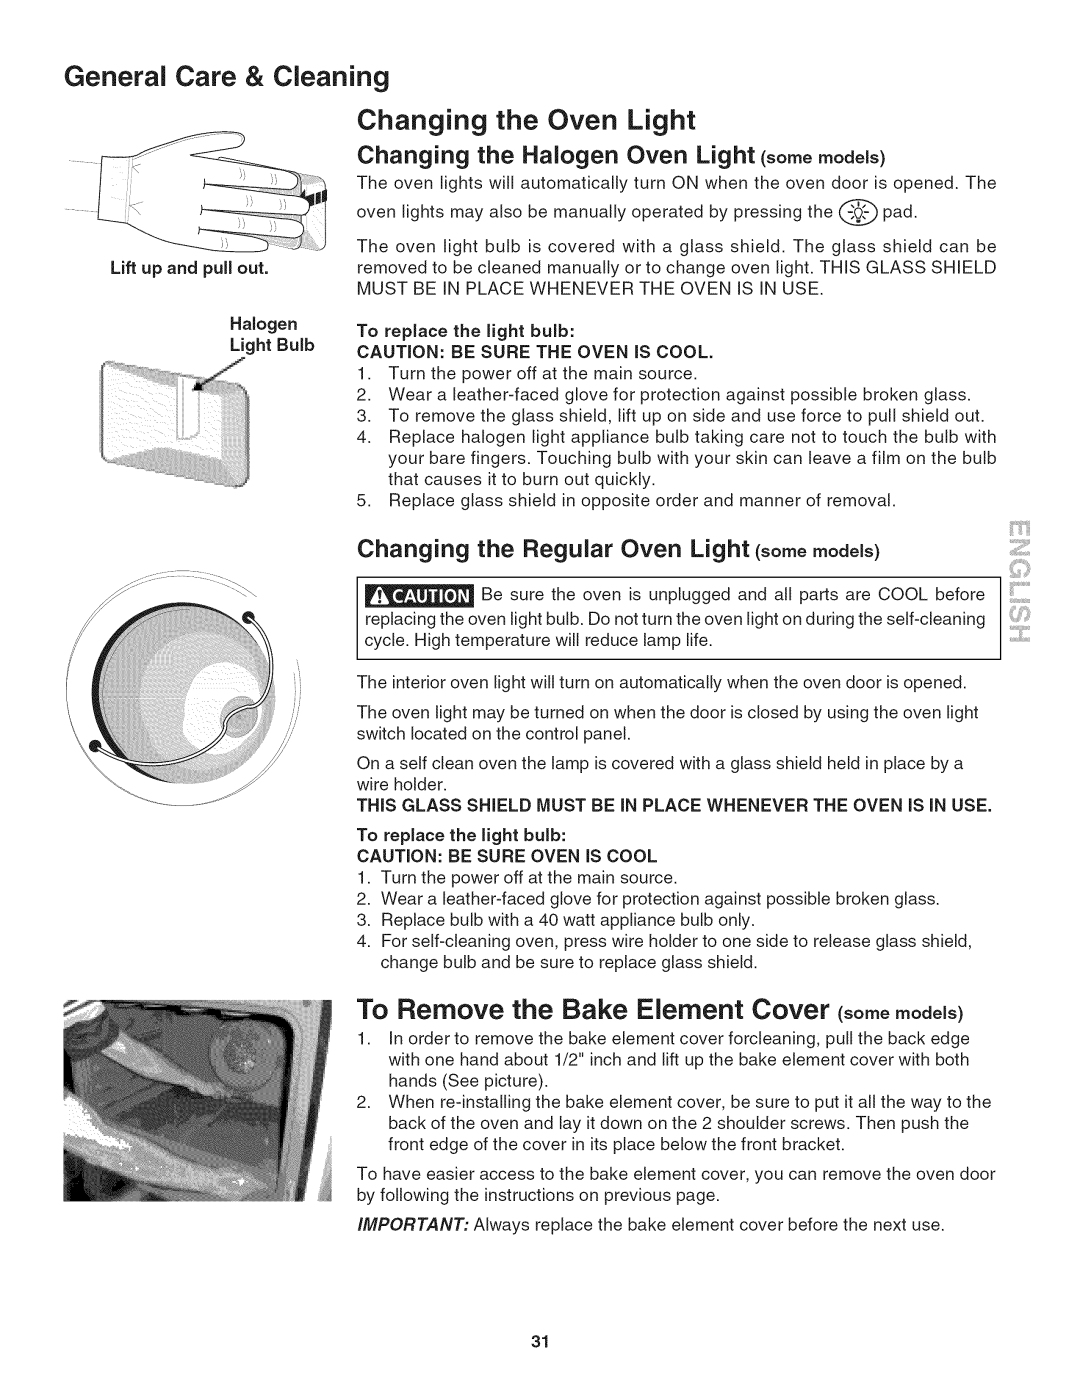 Kenmore 790.4802, 790.4803 General Care & Cleaning Changing the Oven Light, To Remove the Bake Element Cover somemode_s 